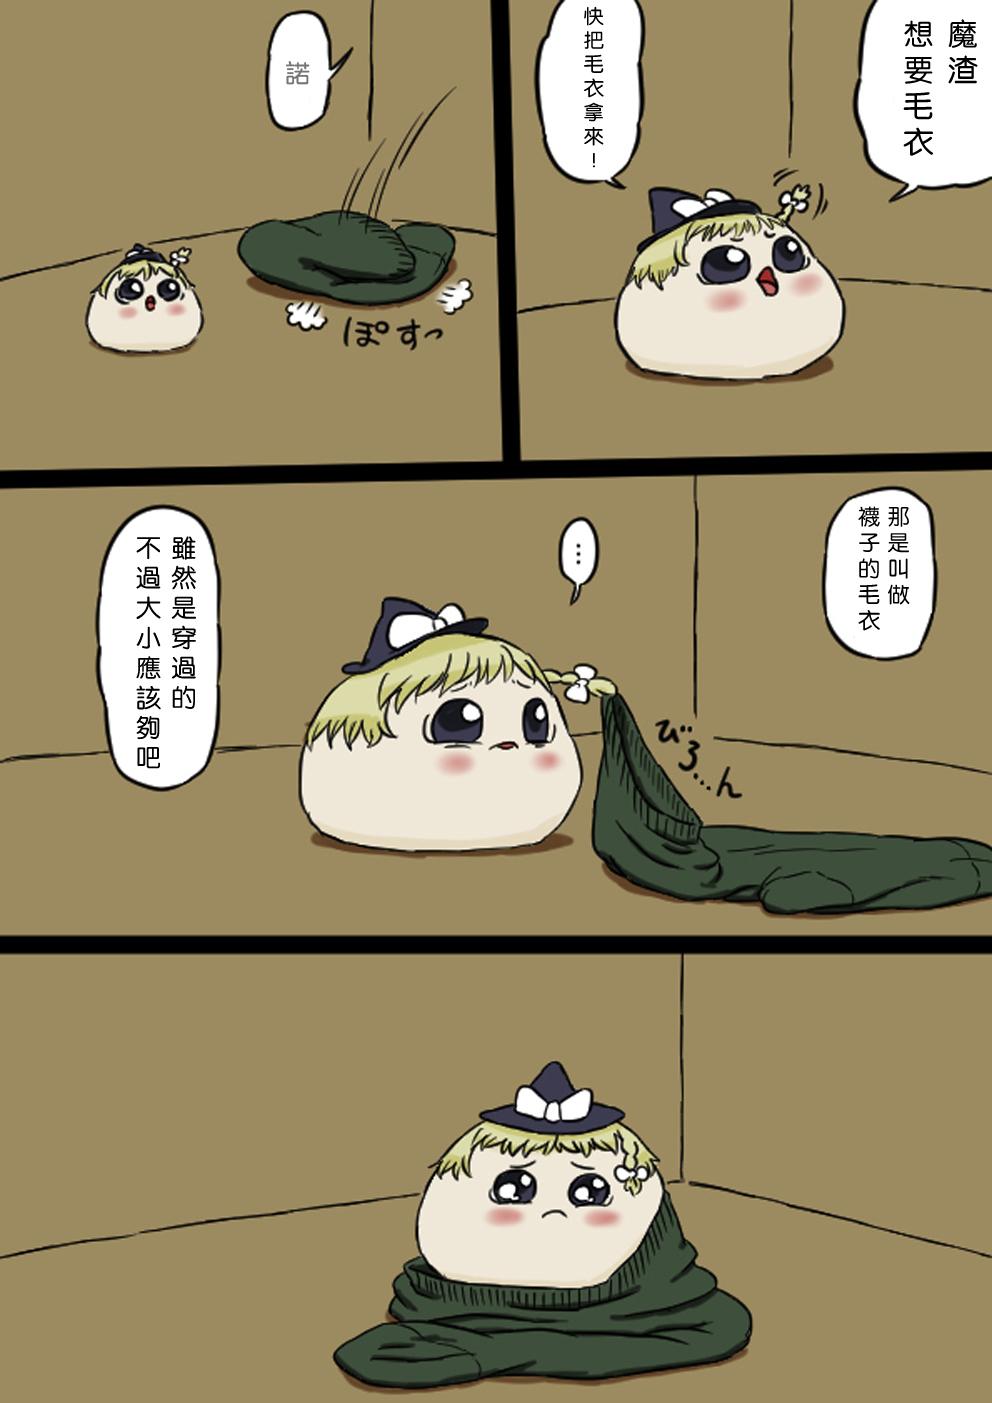 Safadinha すべてをてにいれたまりちゃ（Chinese） - Touhou project Ghetto - Page 5